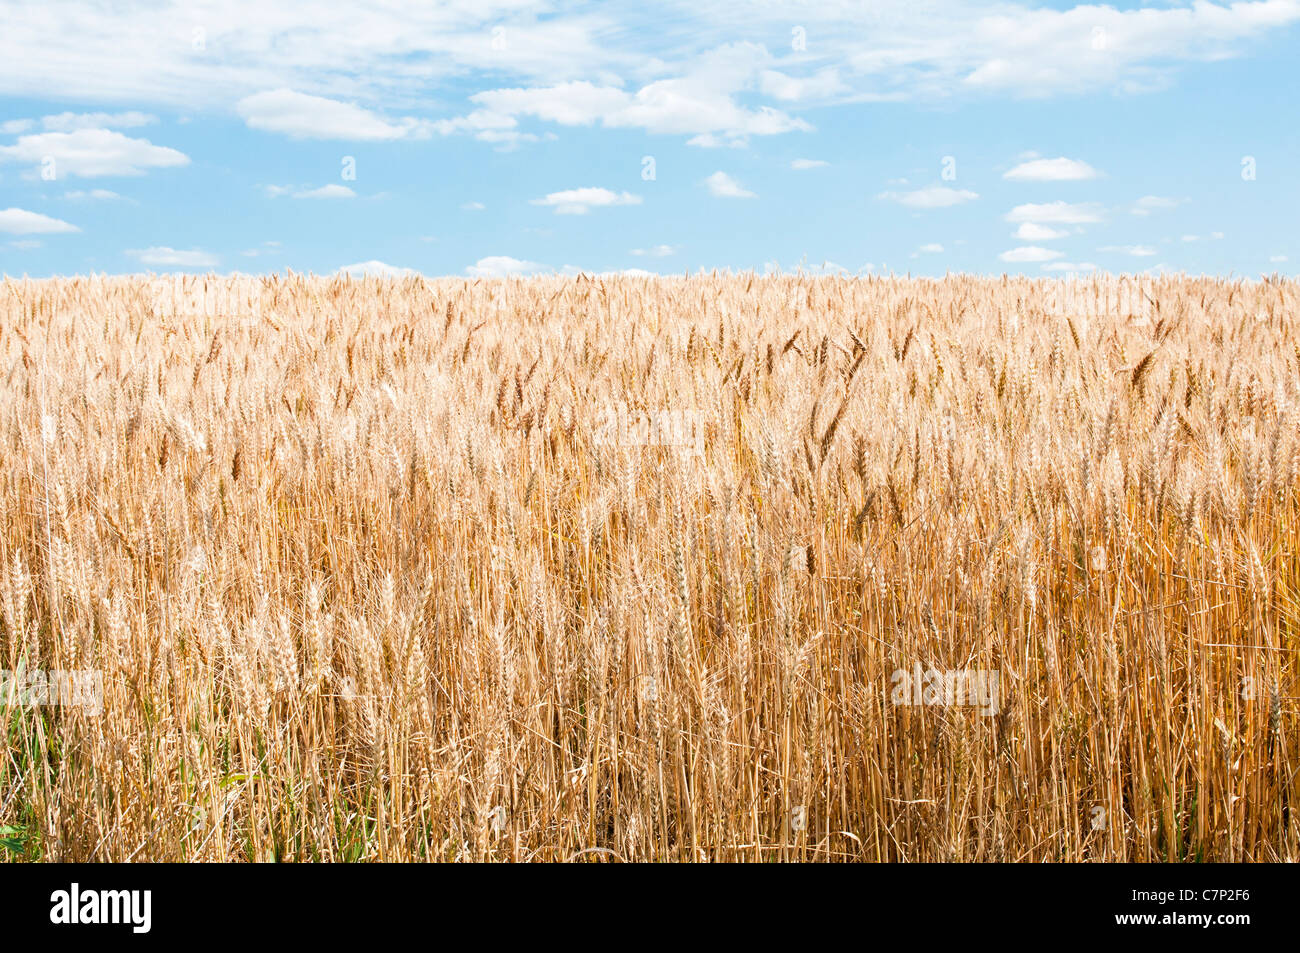 A ripe crop of wheat is shown in the field with white puffy clouds in the blue sky. Stock Photo